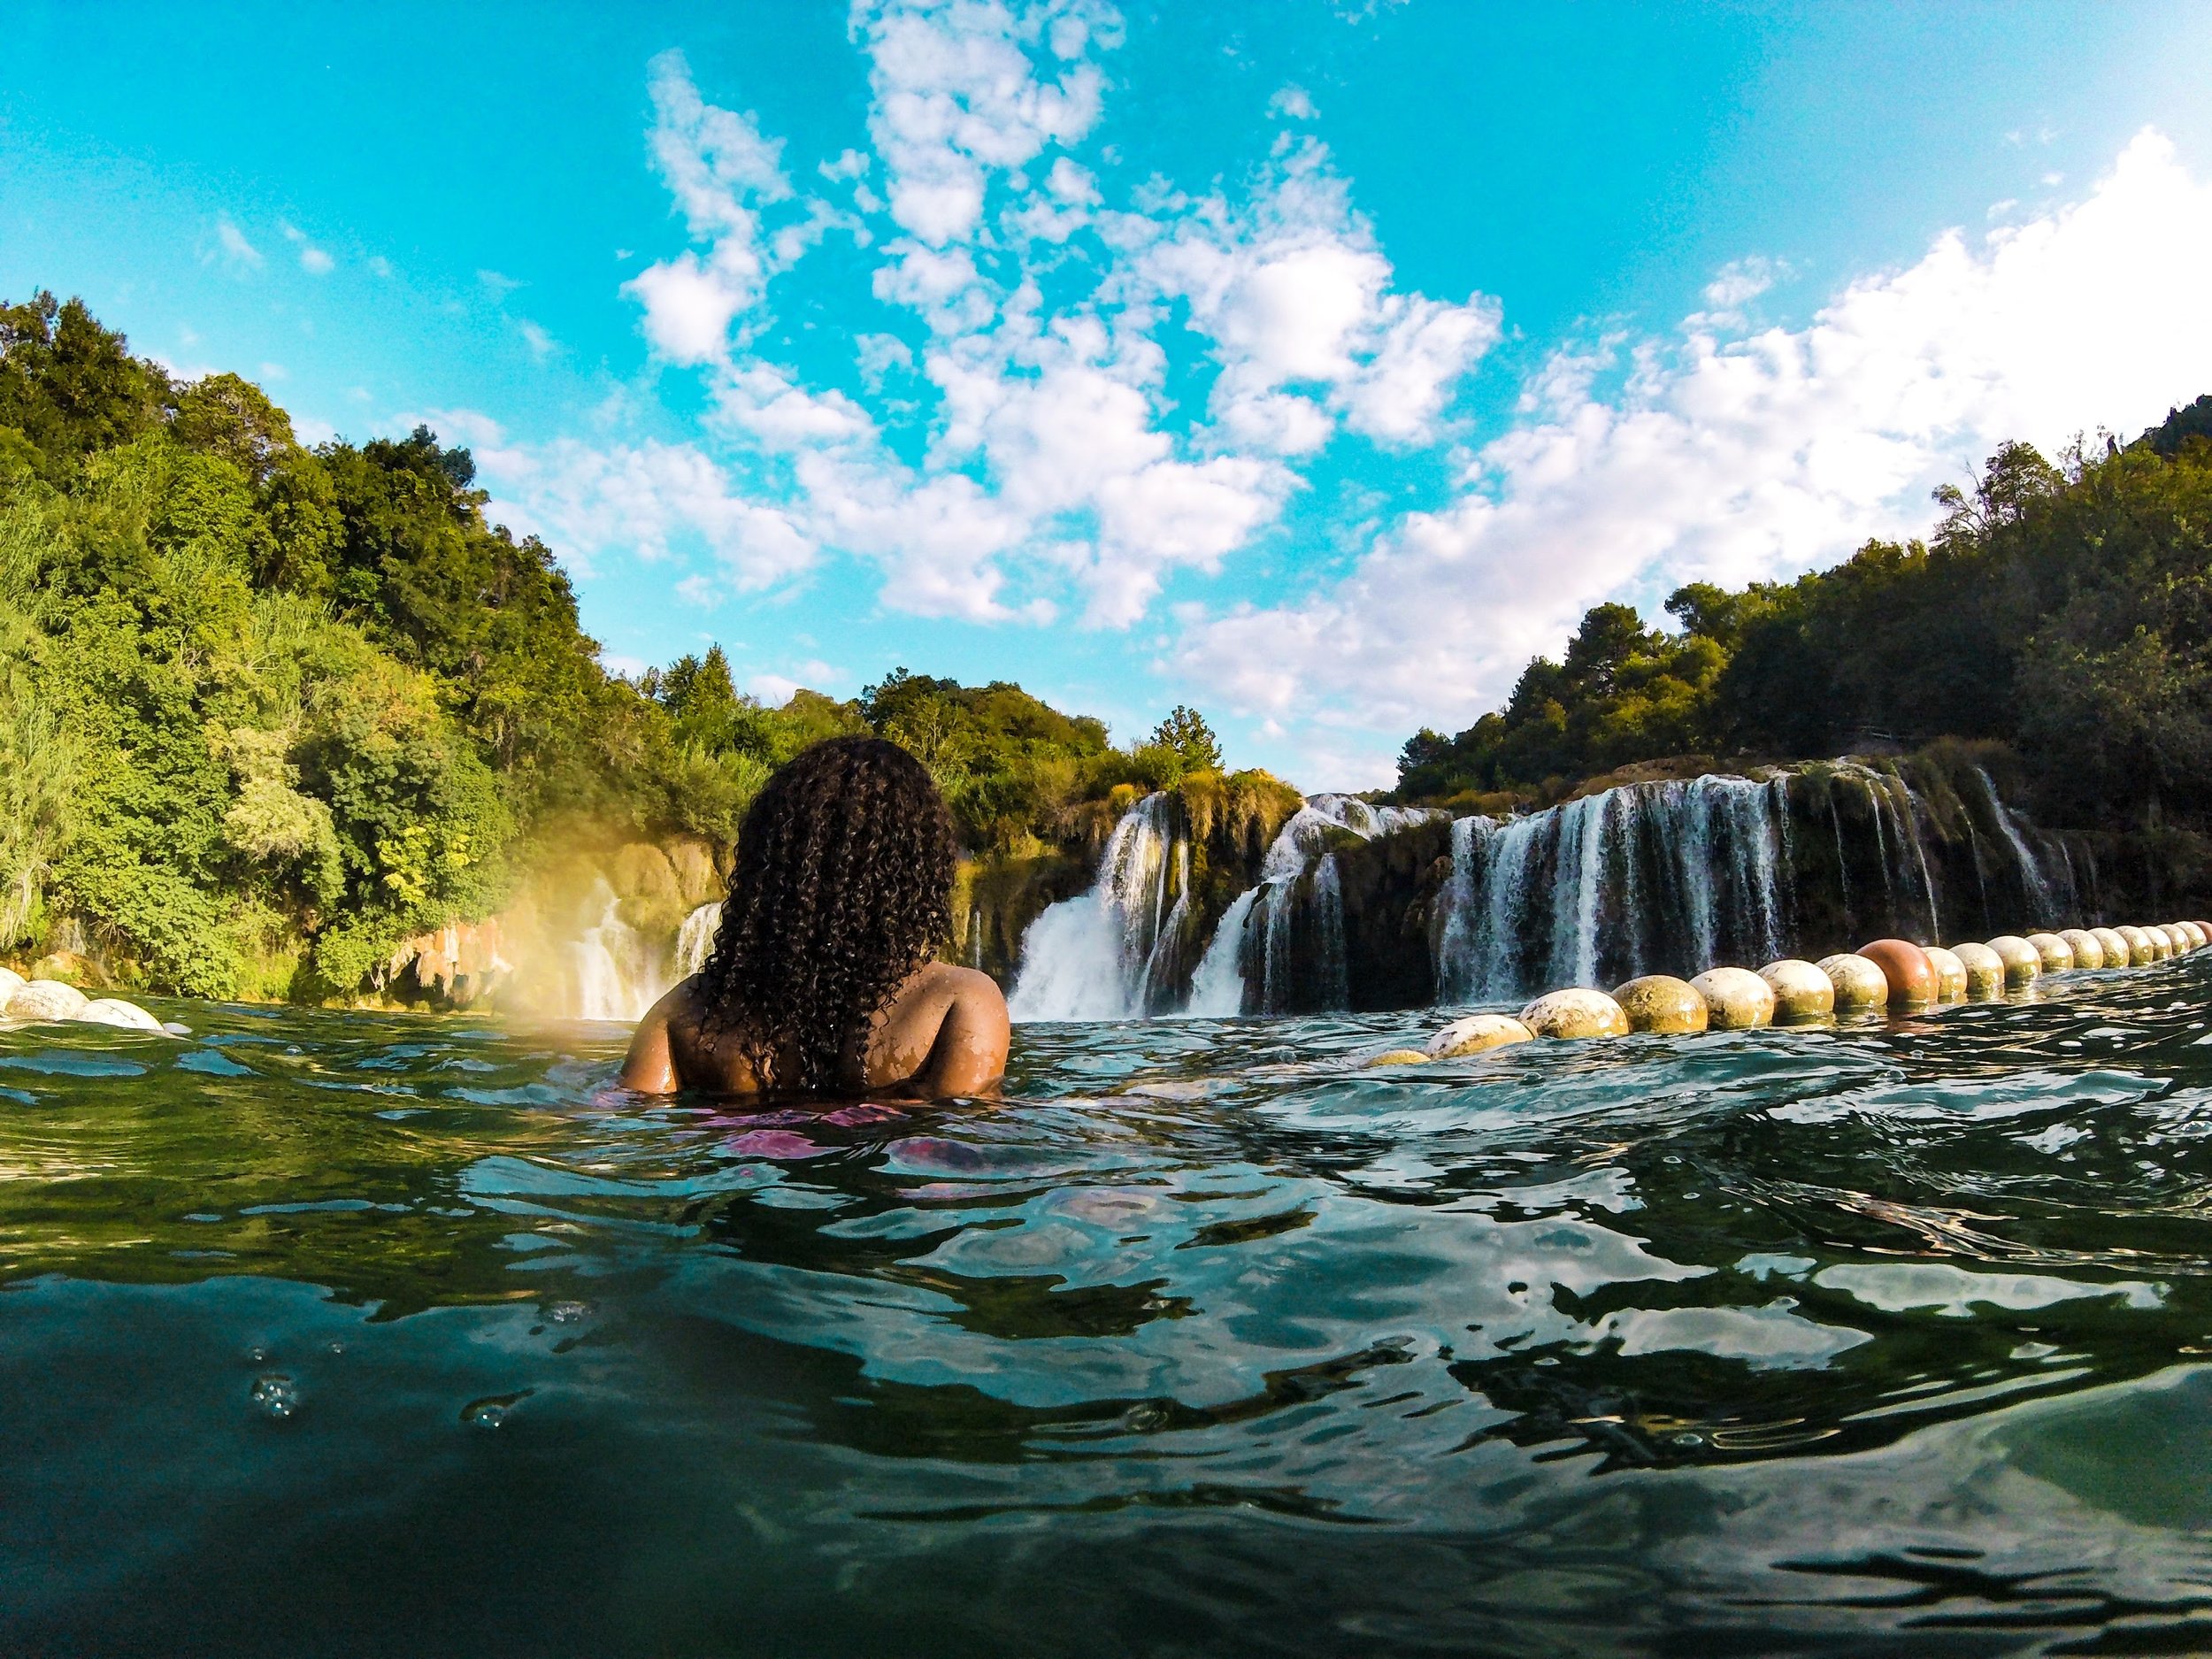 This photo was taken with a go-pro at Krka National Park in Croatia